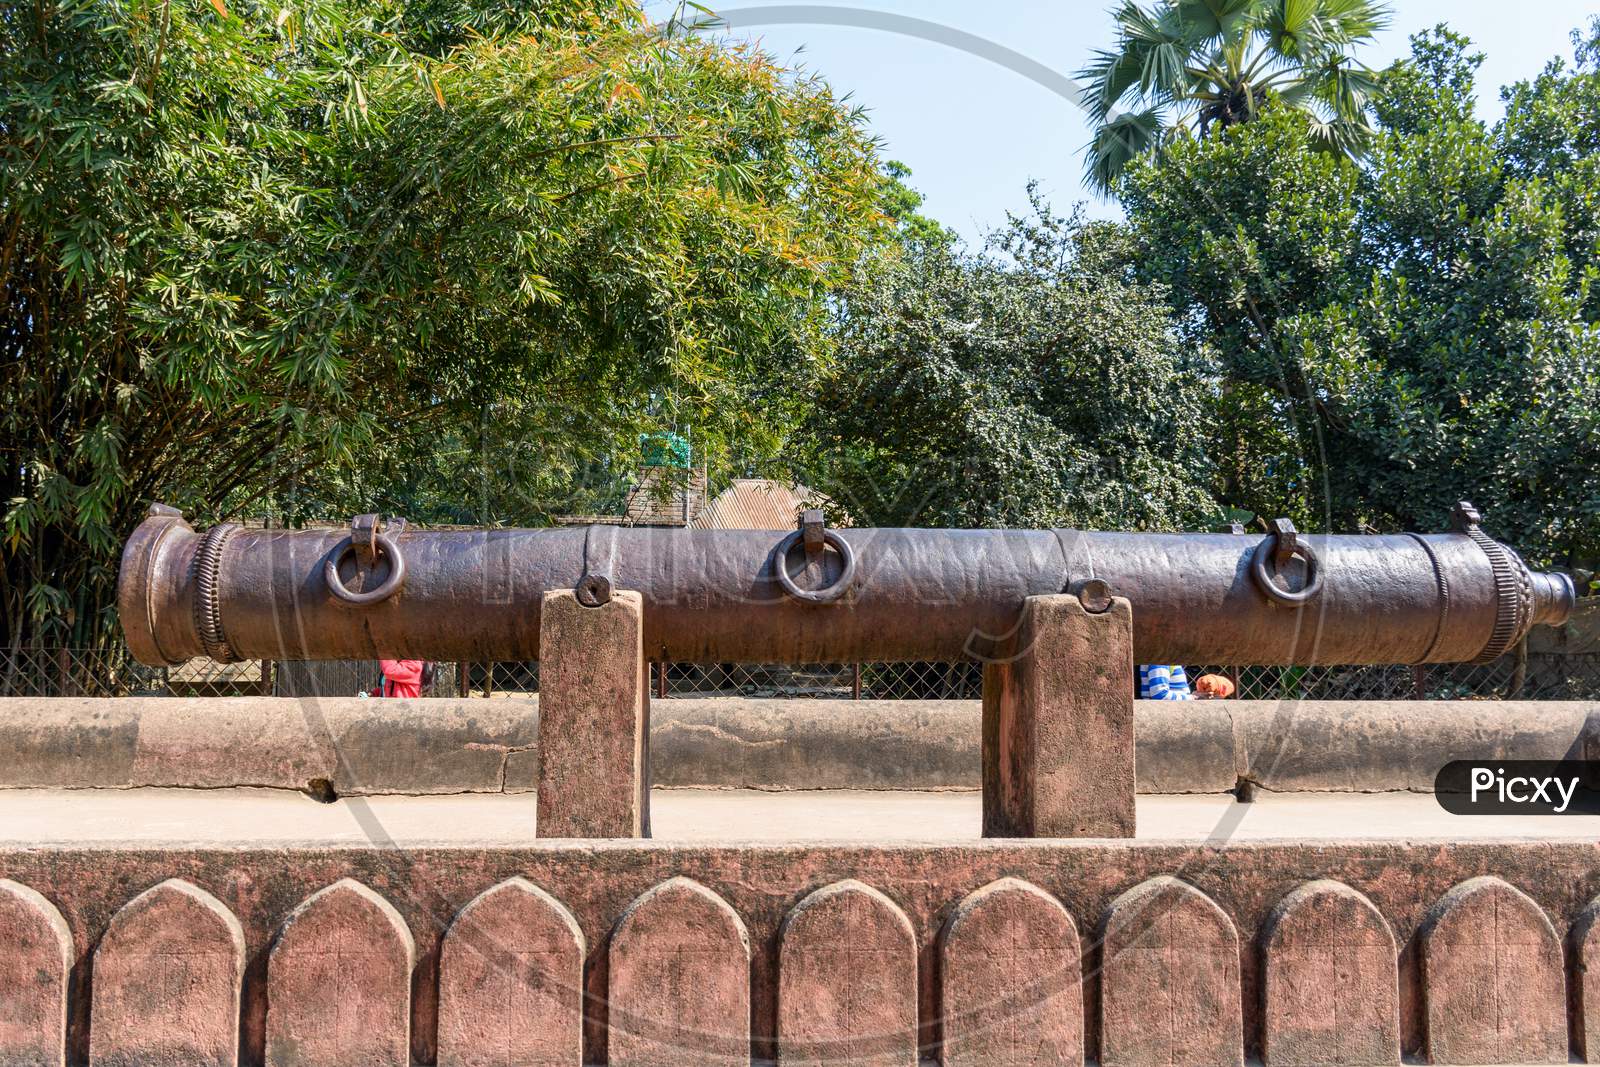 Picture Of Jahan Kosha Cannon Also Known As The Great Gun, Was Built By Craftsman Janardan Karmakar.